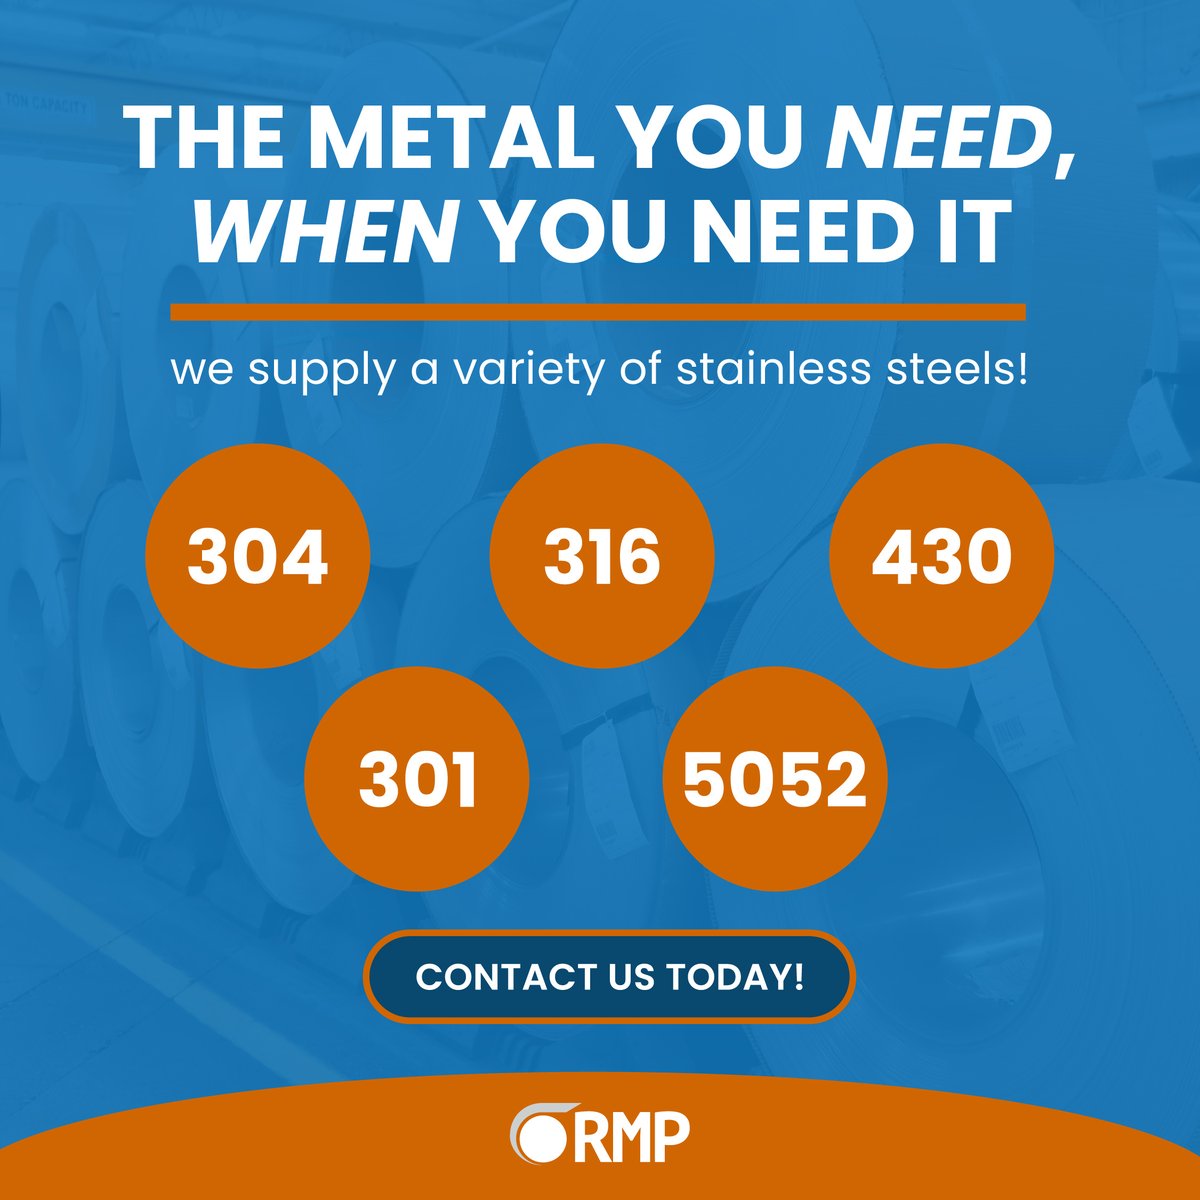 Discover the versatility of our stainless steel coil grades, from Type 304 to Type 316. Click here 👉  #stainless #steel #stainlesssteel #stainlesscoil #metalcoil #metaldistributor #steelsupplier